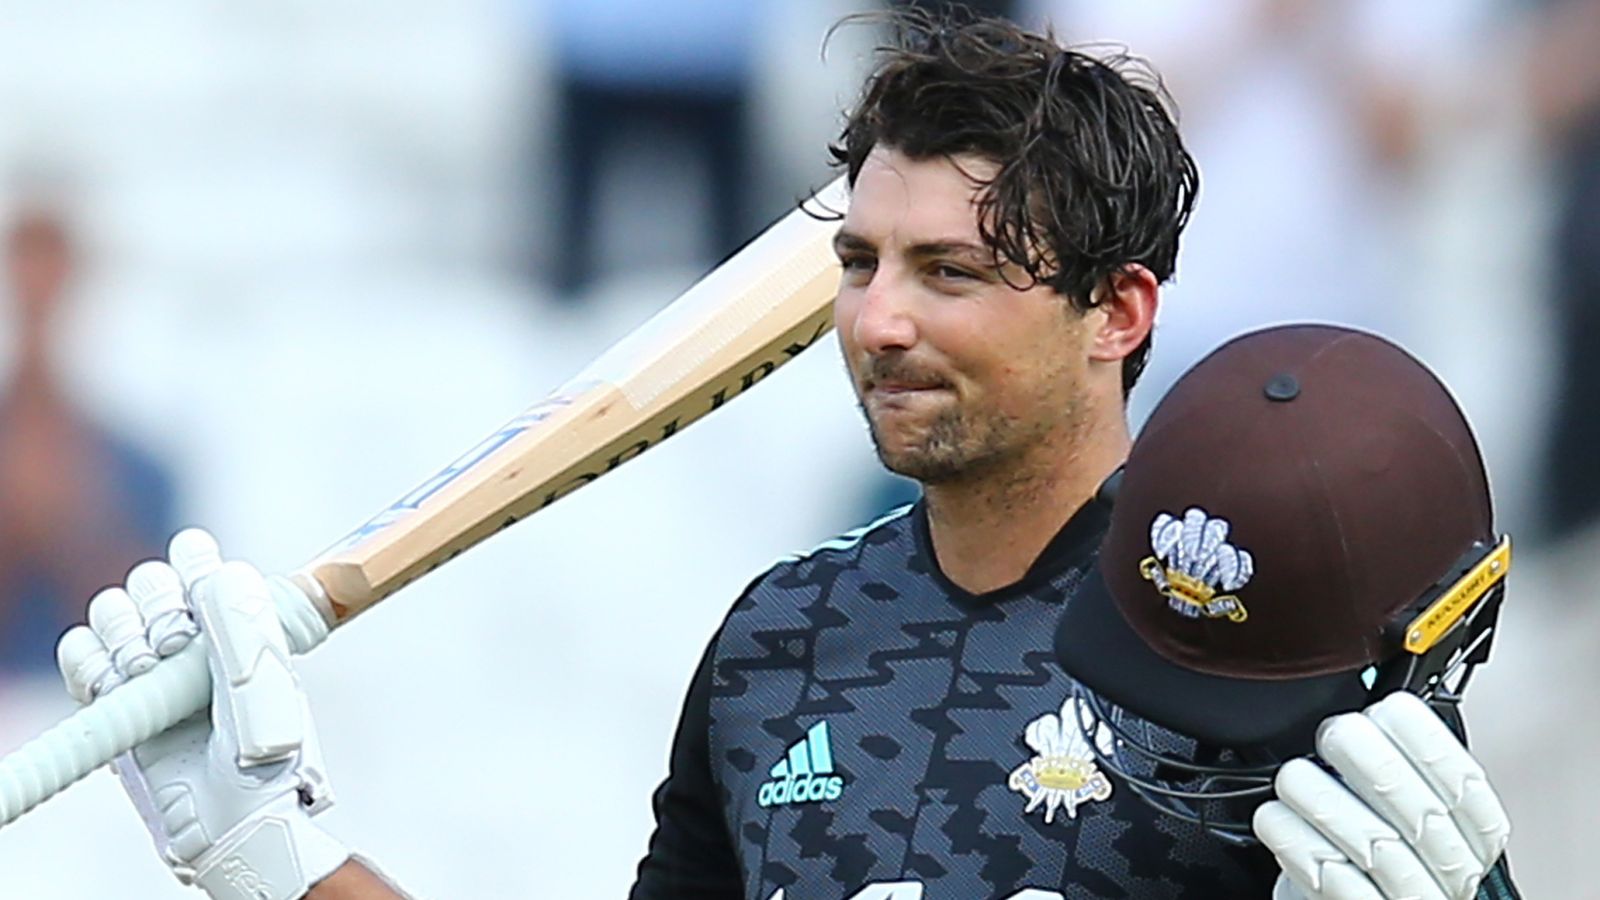 Royal London Cup: Tim David smashes 67-ball century as Surrey qualify for semi-finals with win over Gloucestershire | Cricket News | Sky Sports